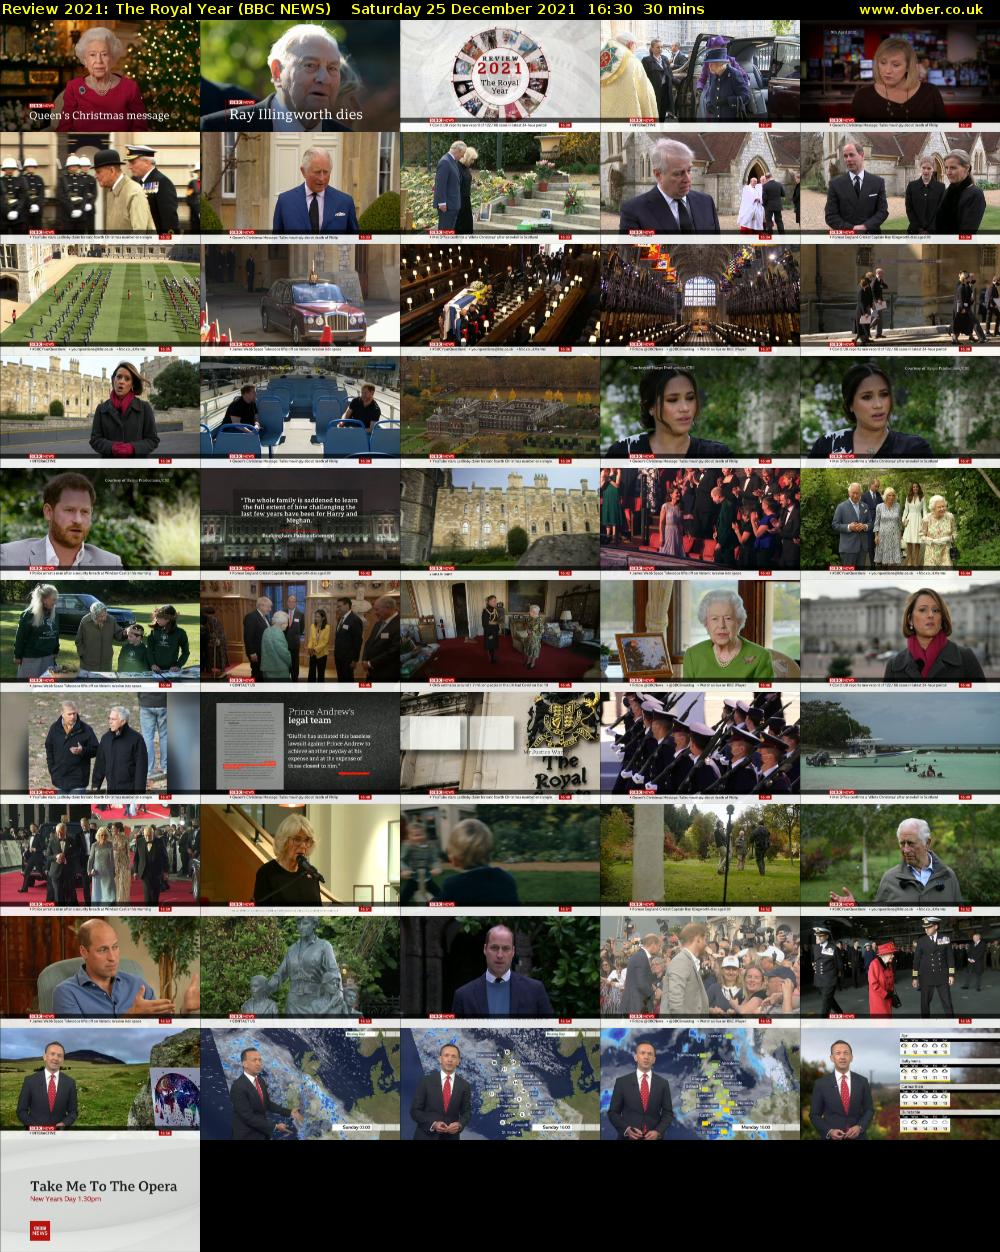 Review 2021: The Royal Year (BBC NEWS) Saturday 25 December 2021 16:30 - 17:00